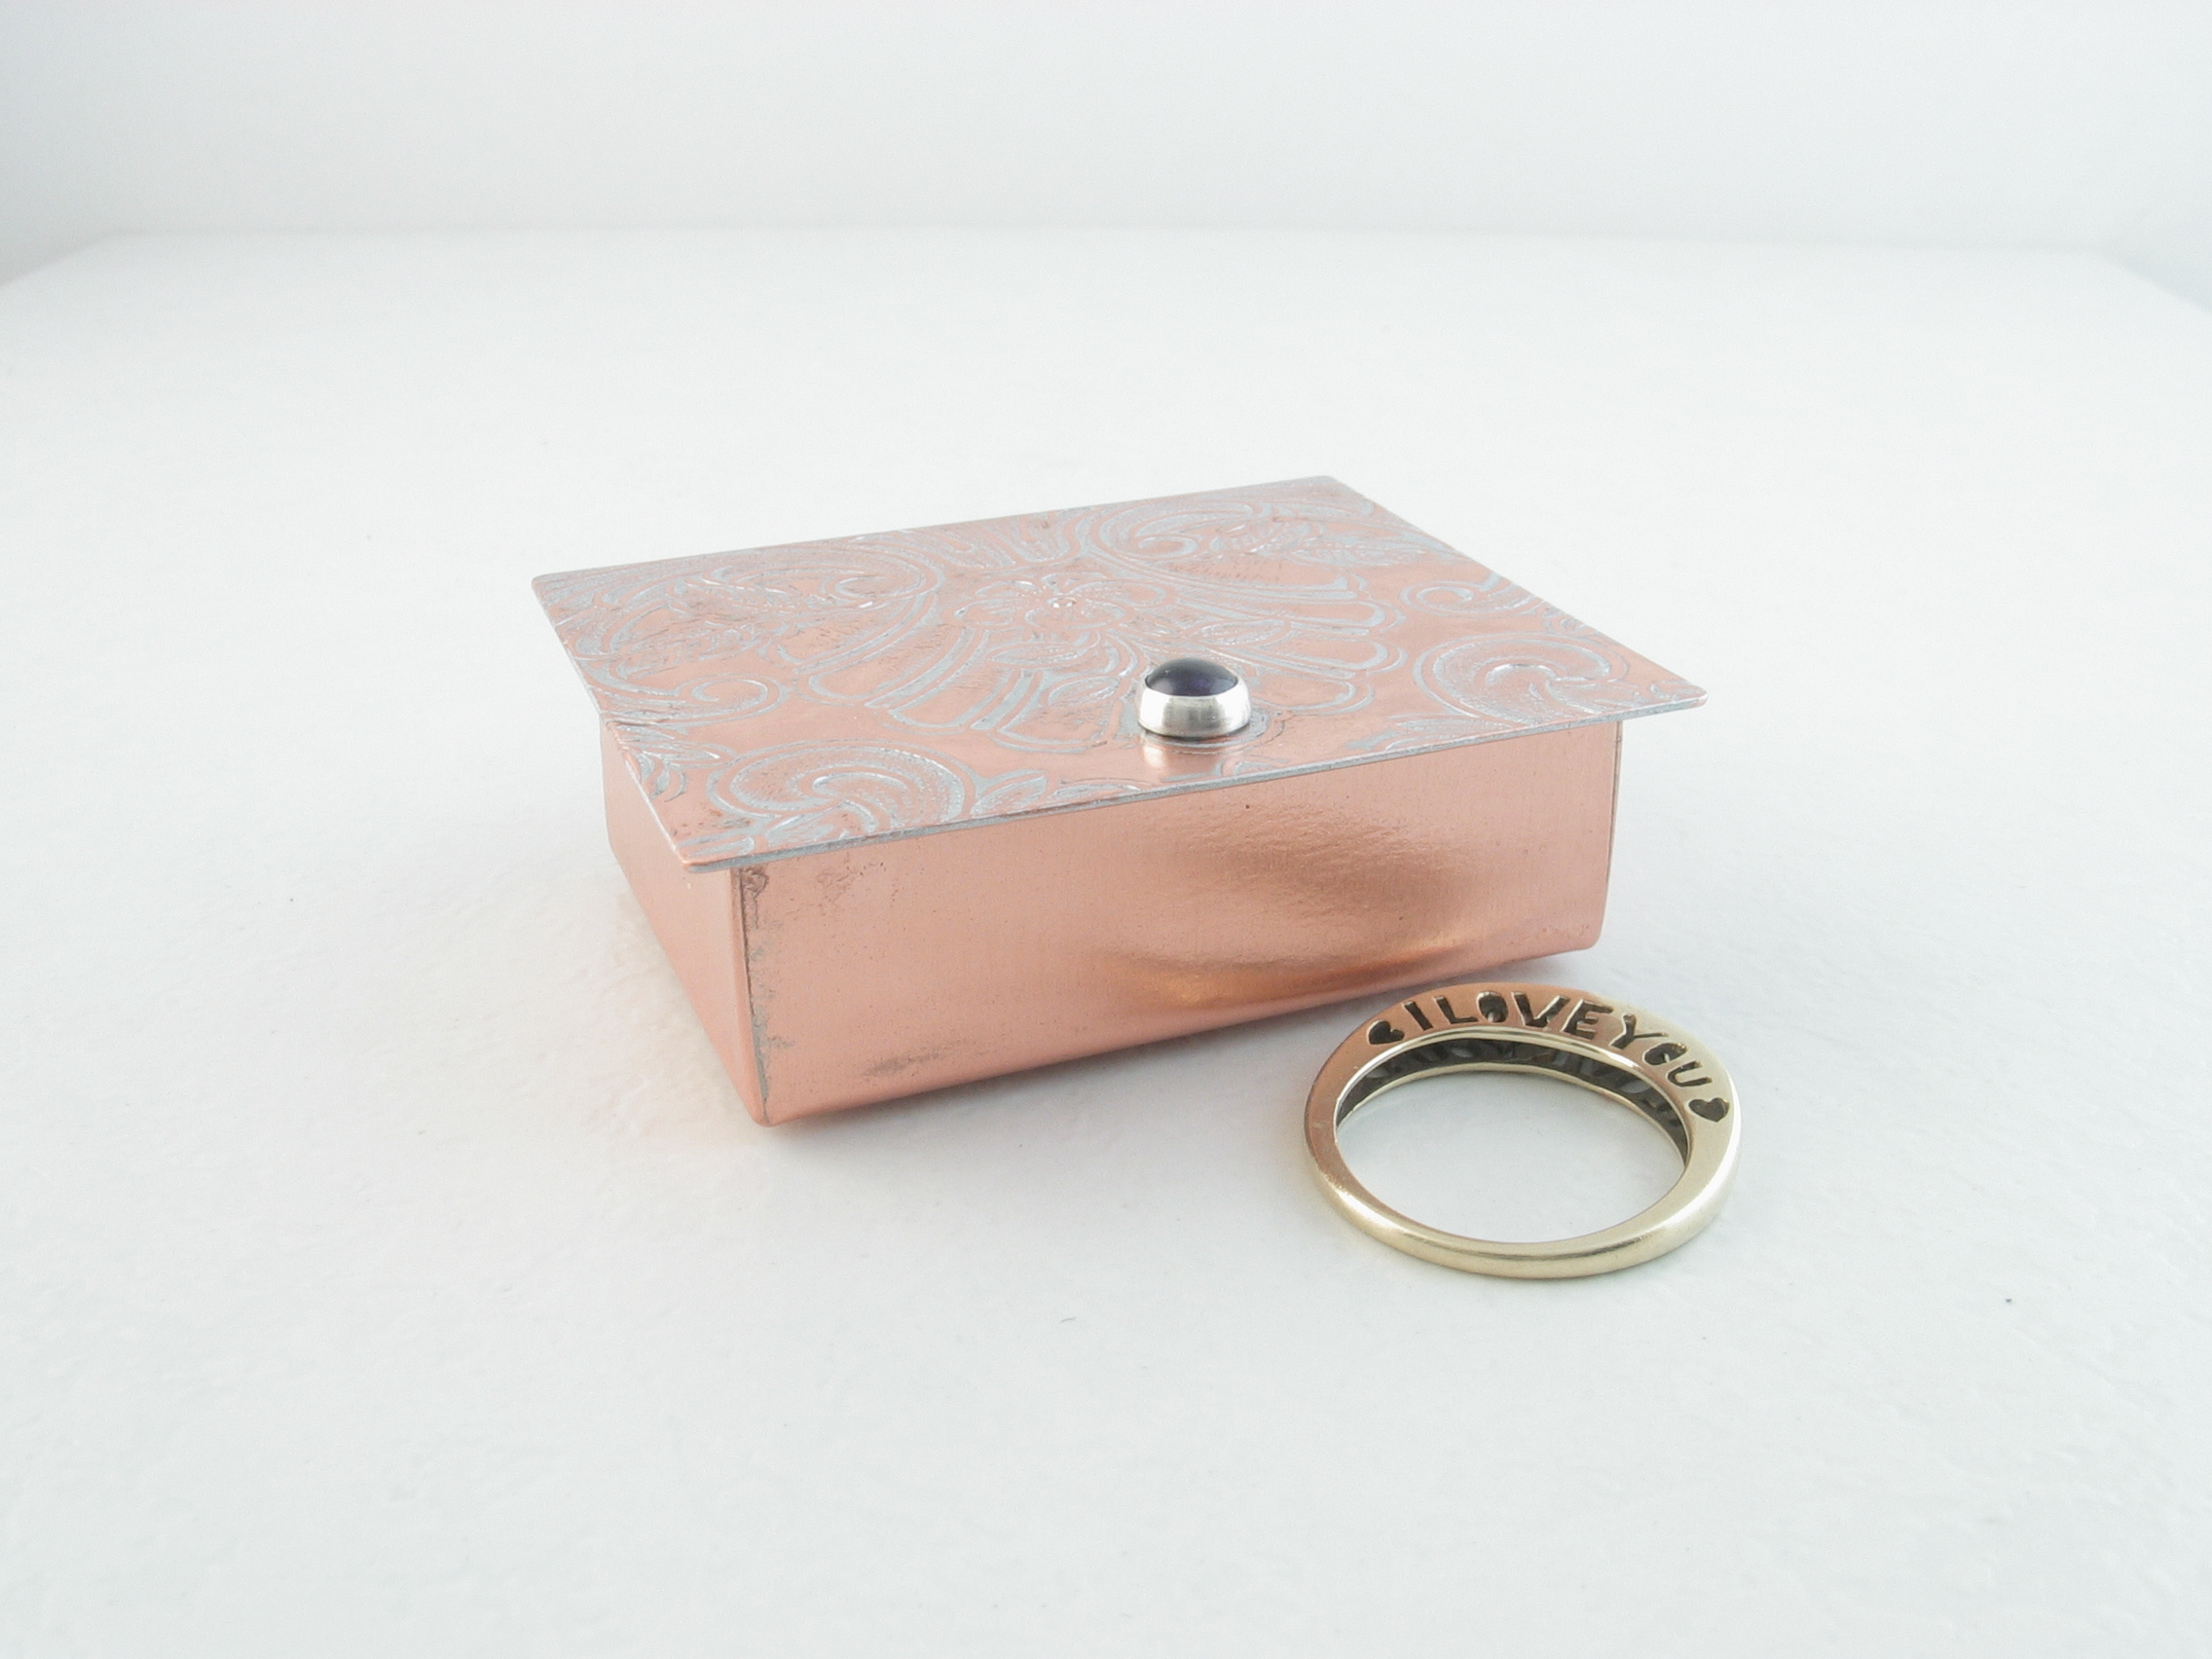 tiny ring box upcycled from vintage copper platter with genuine amethyst gemstone on hinged lid